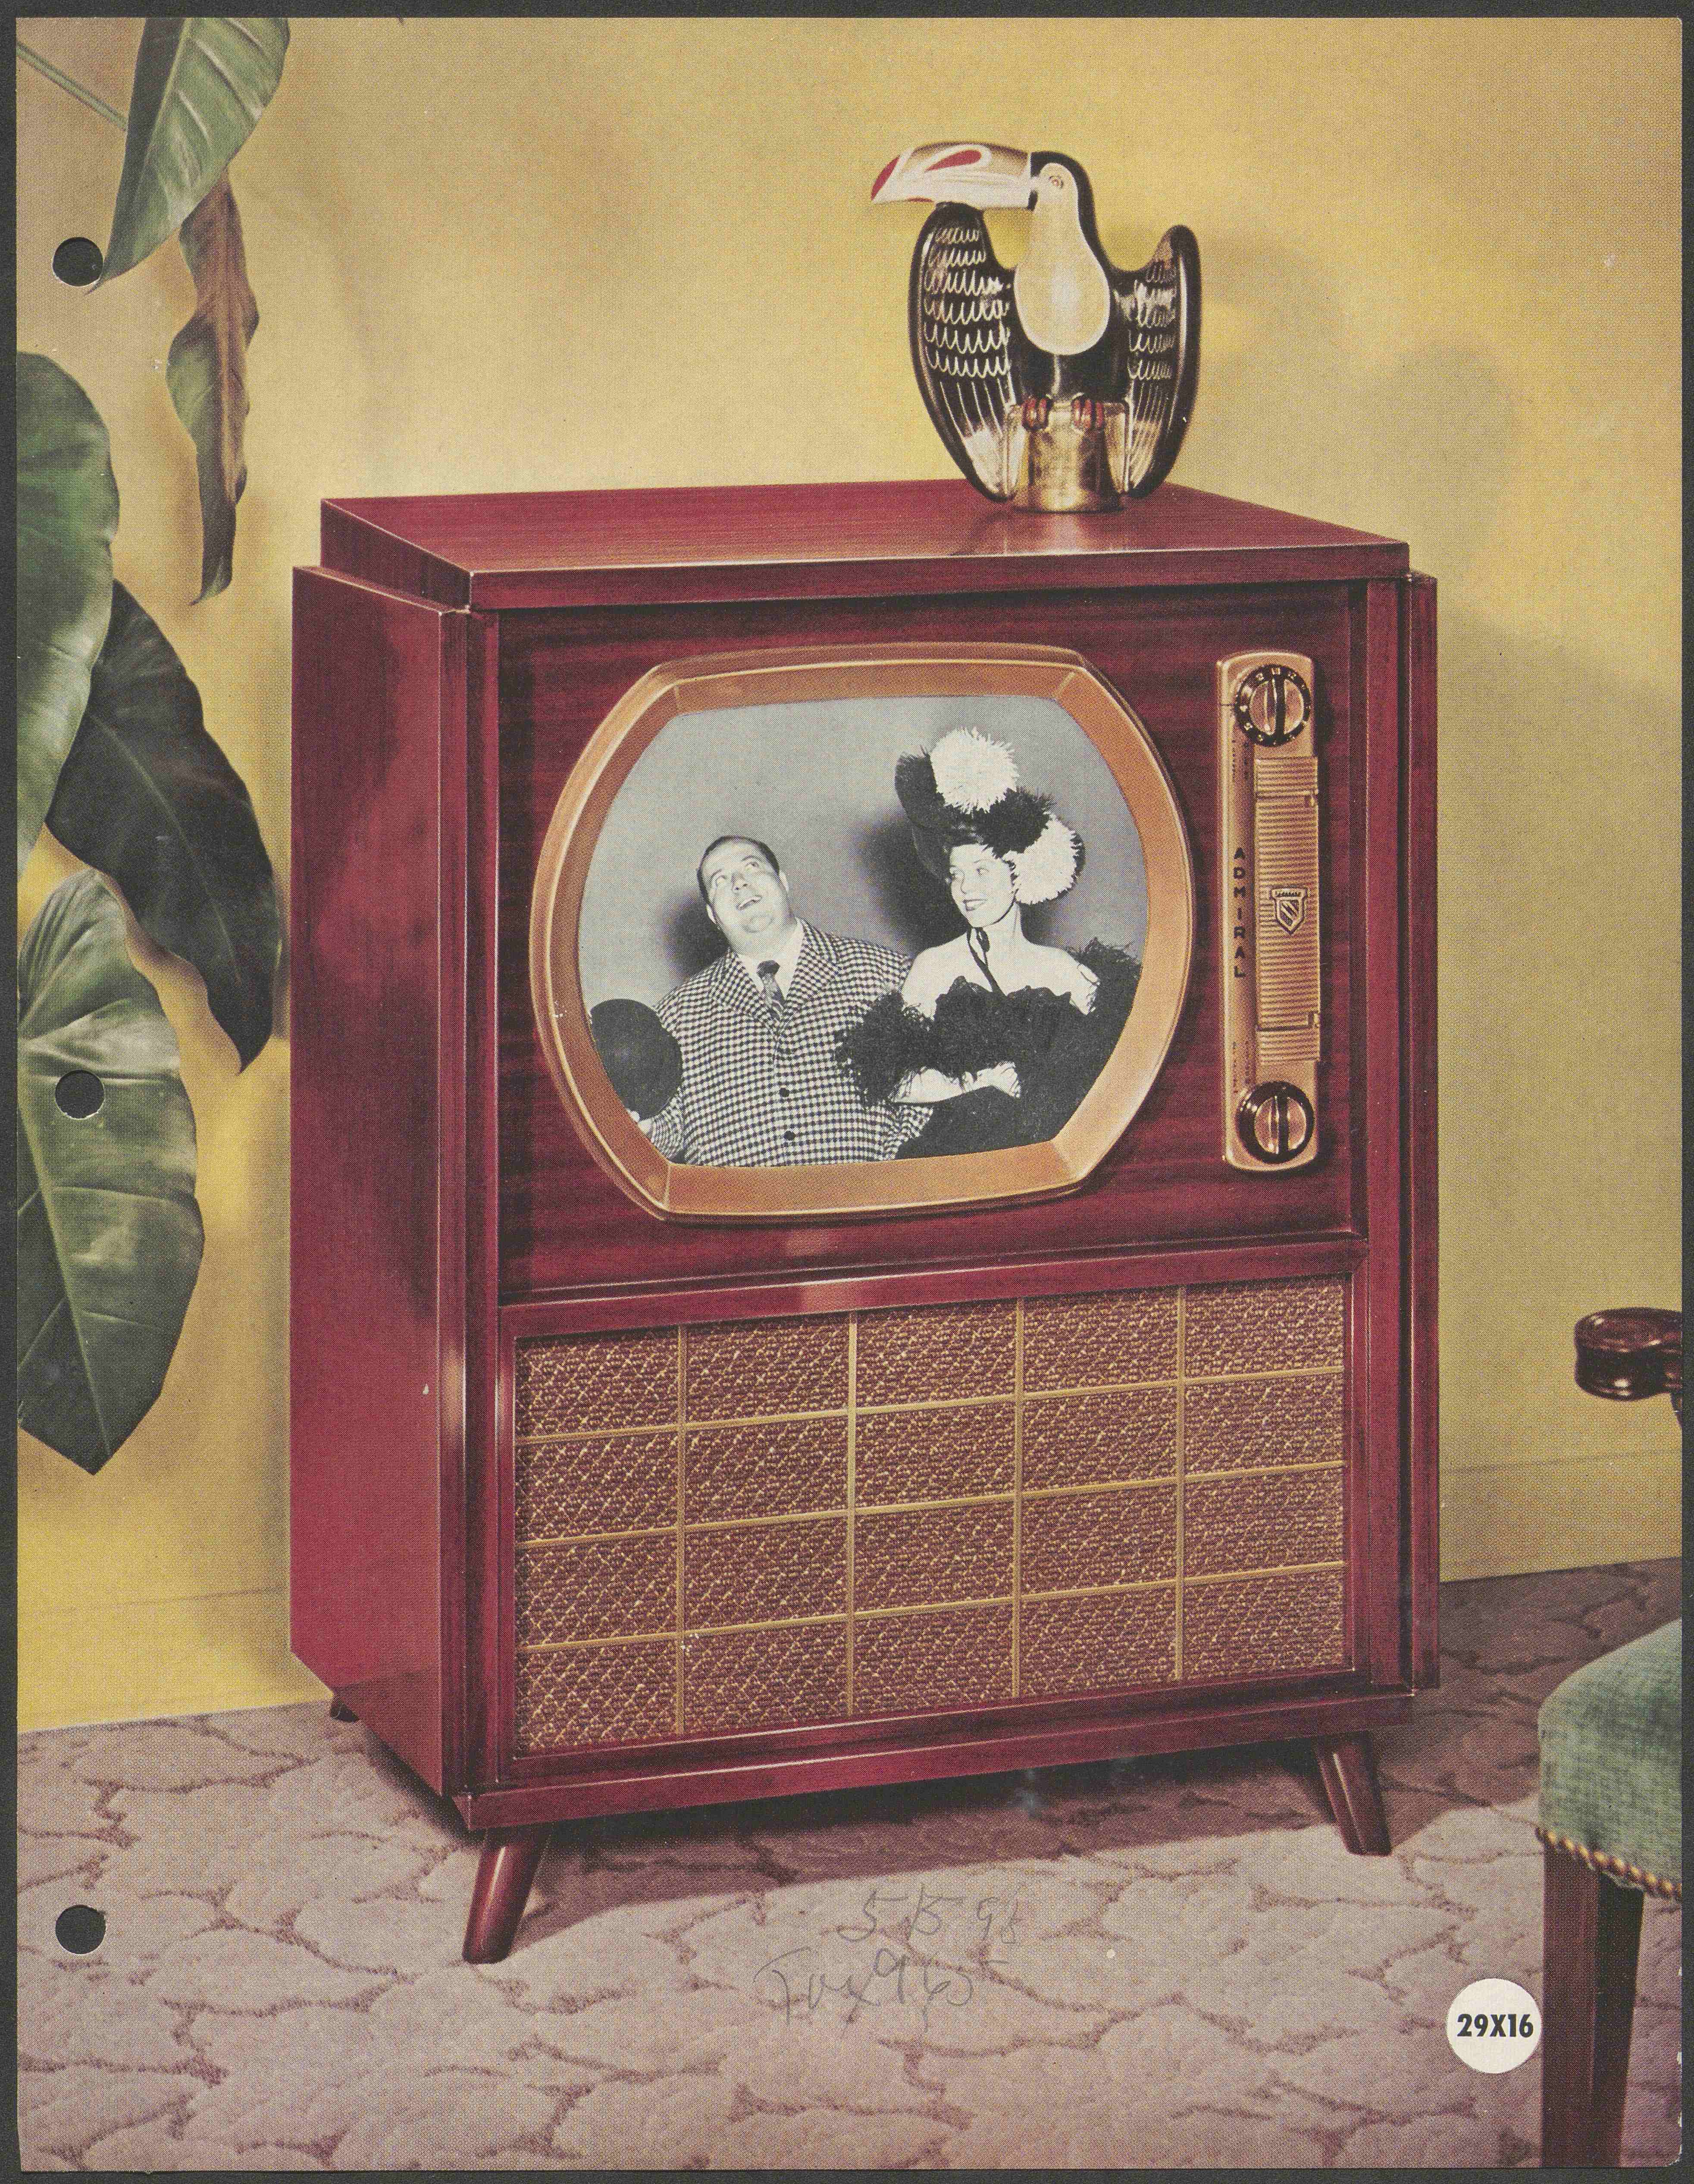 Color image of a television set in a domestic room with 1950s decor.